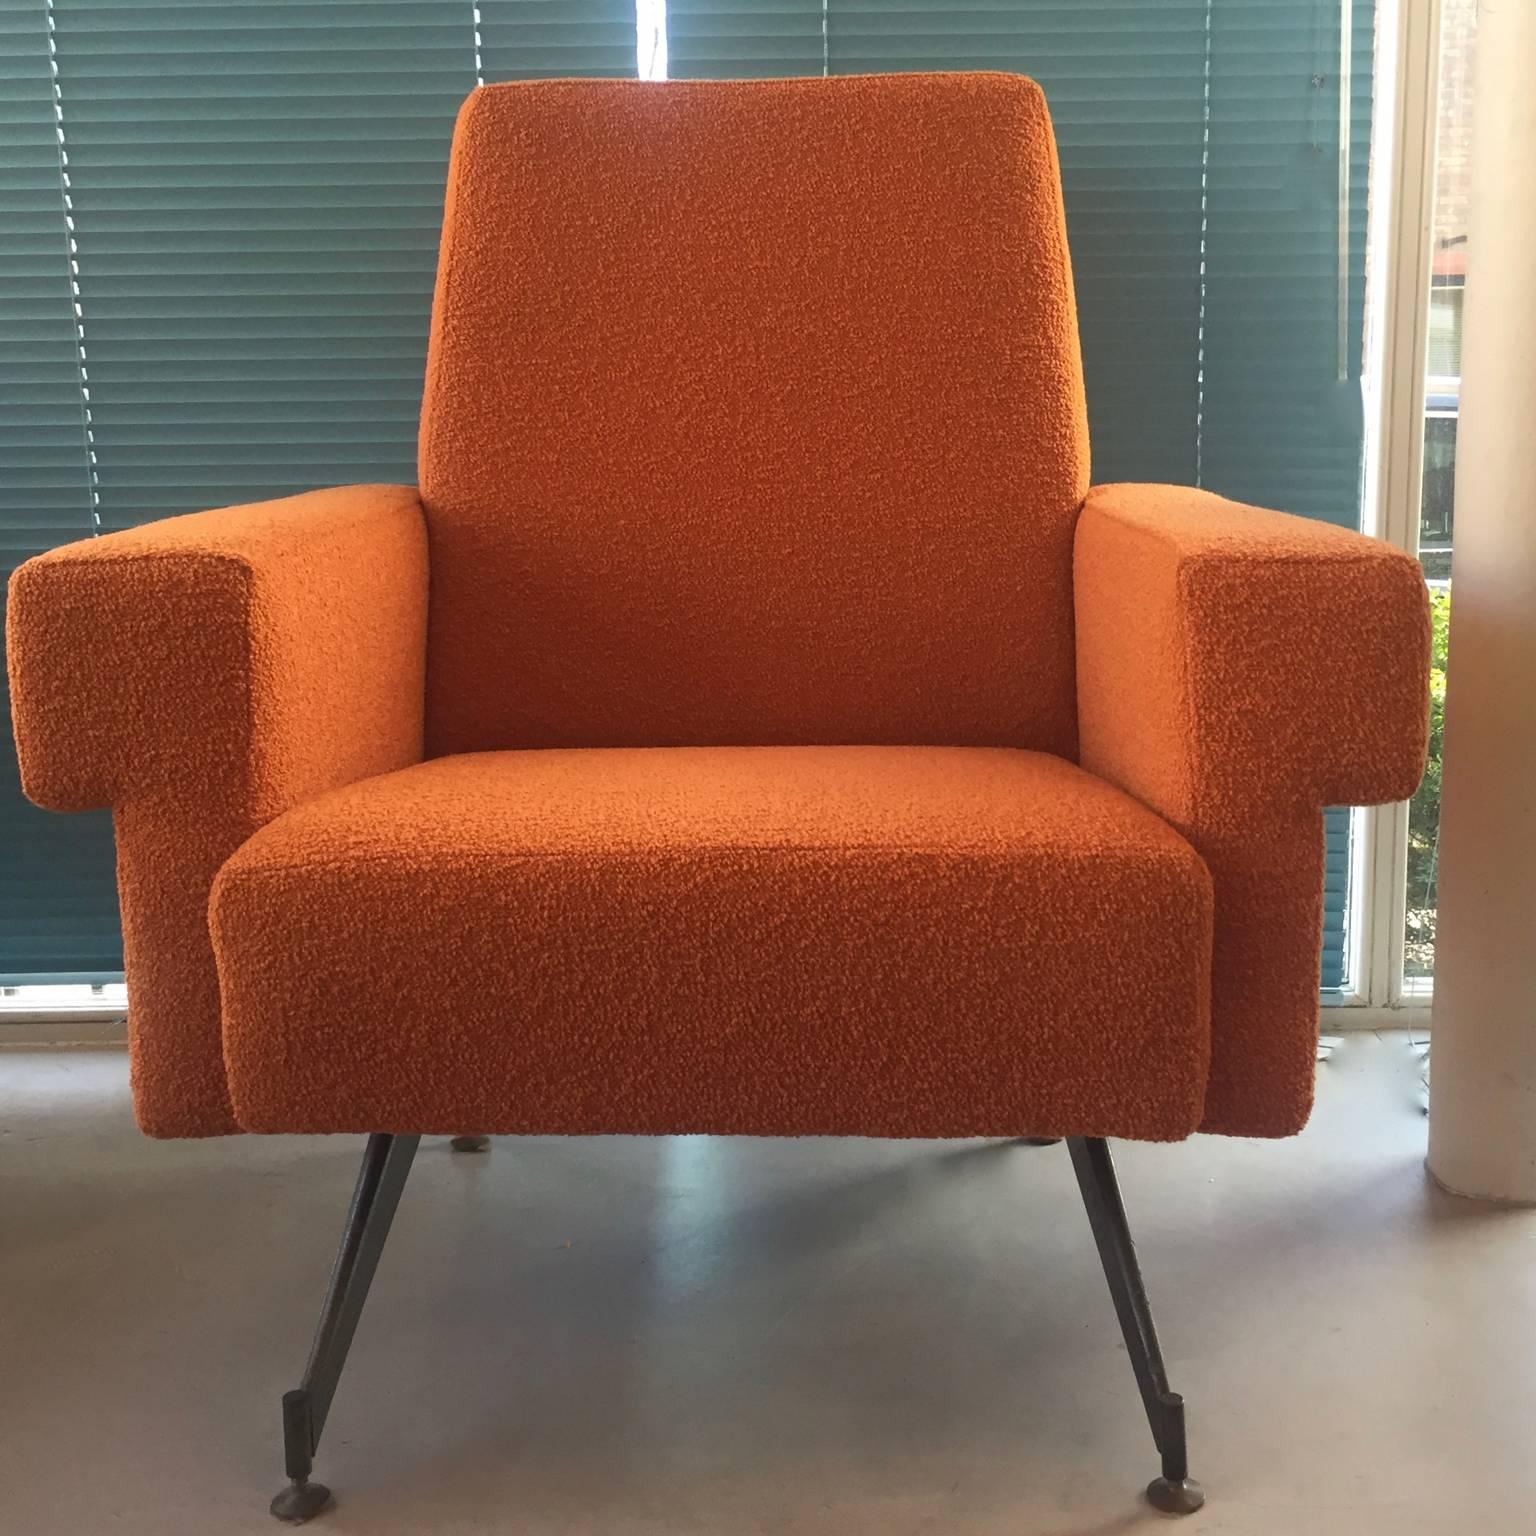 A pair of 1960s cubic armchairs reupholstered in an orange bouclé wool. Original Industrial grey base on adjustable feet, mid-century modern.